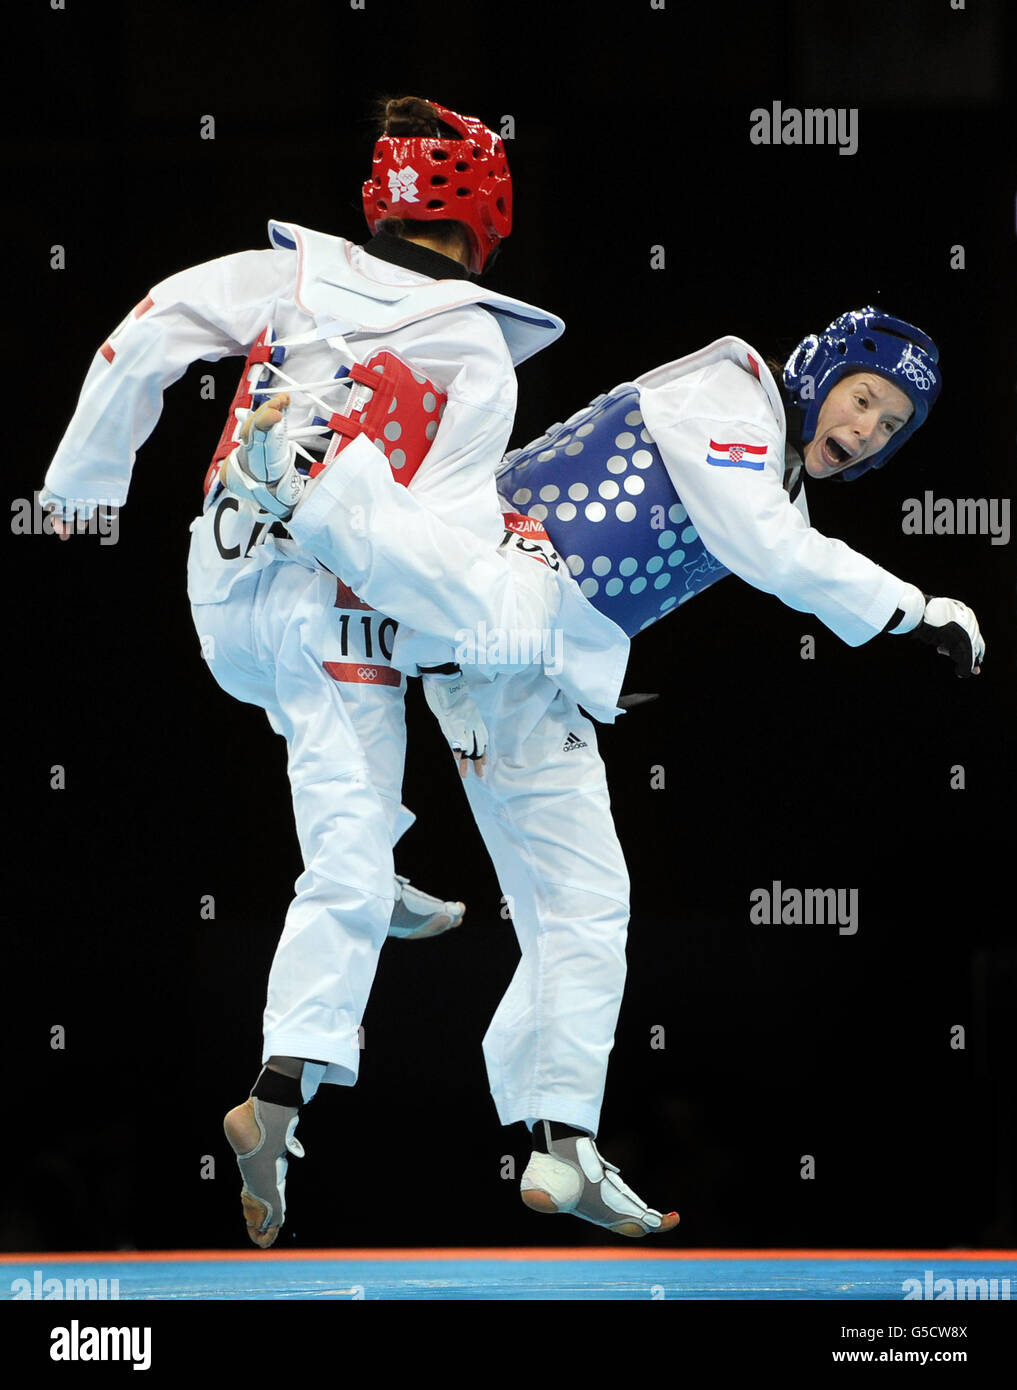 Central African republic's Seulki Kang (red) competes against Croatia's Lucija Zaninovic during the Women's (-49kg) Taekwondo at the ExCel centre, London Stock Photo